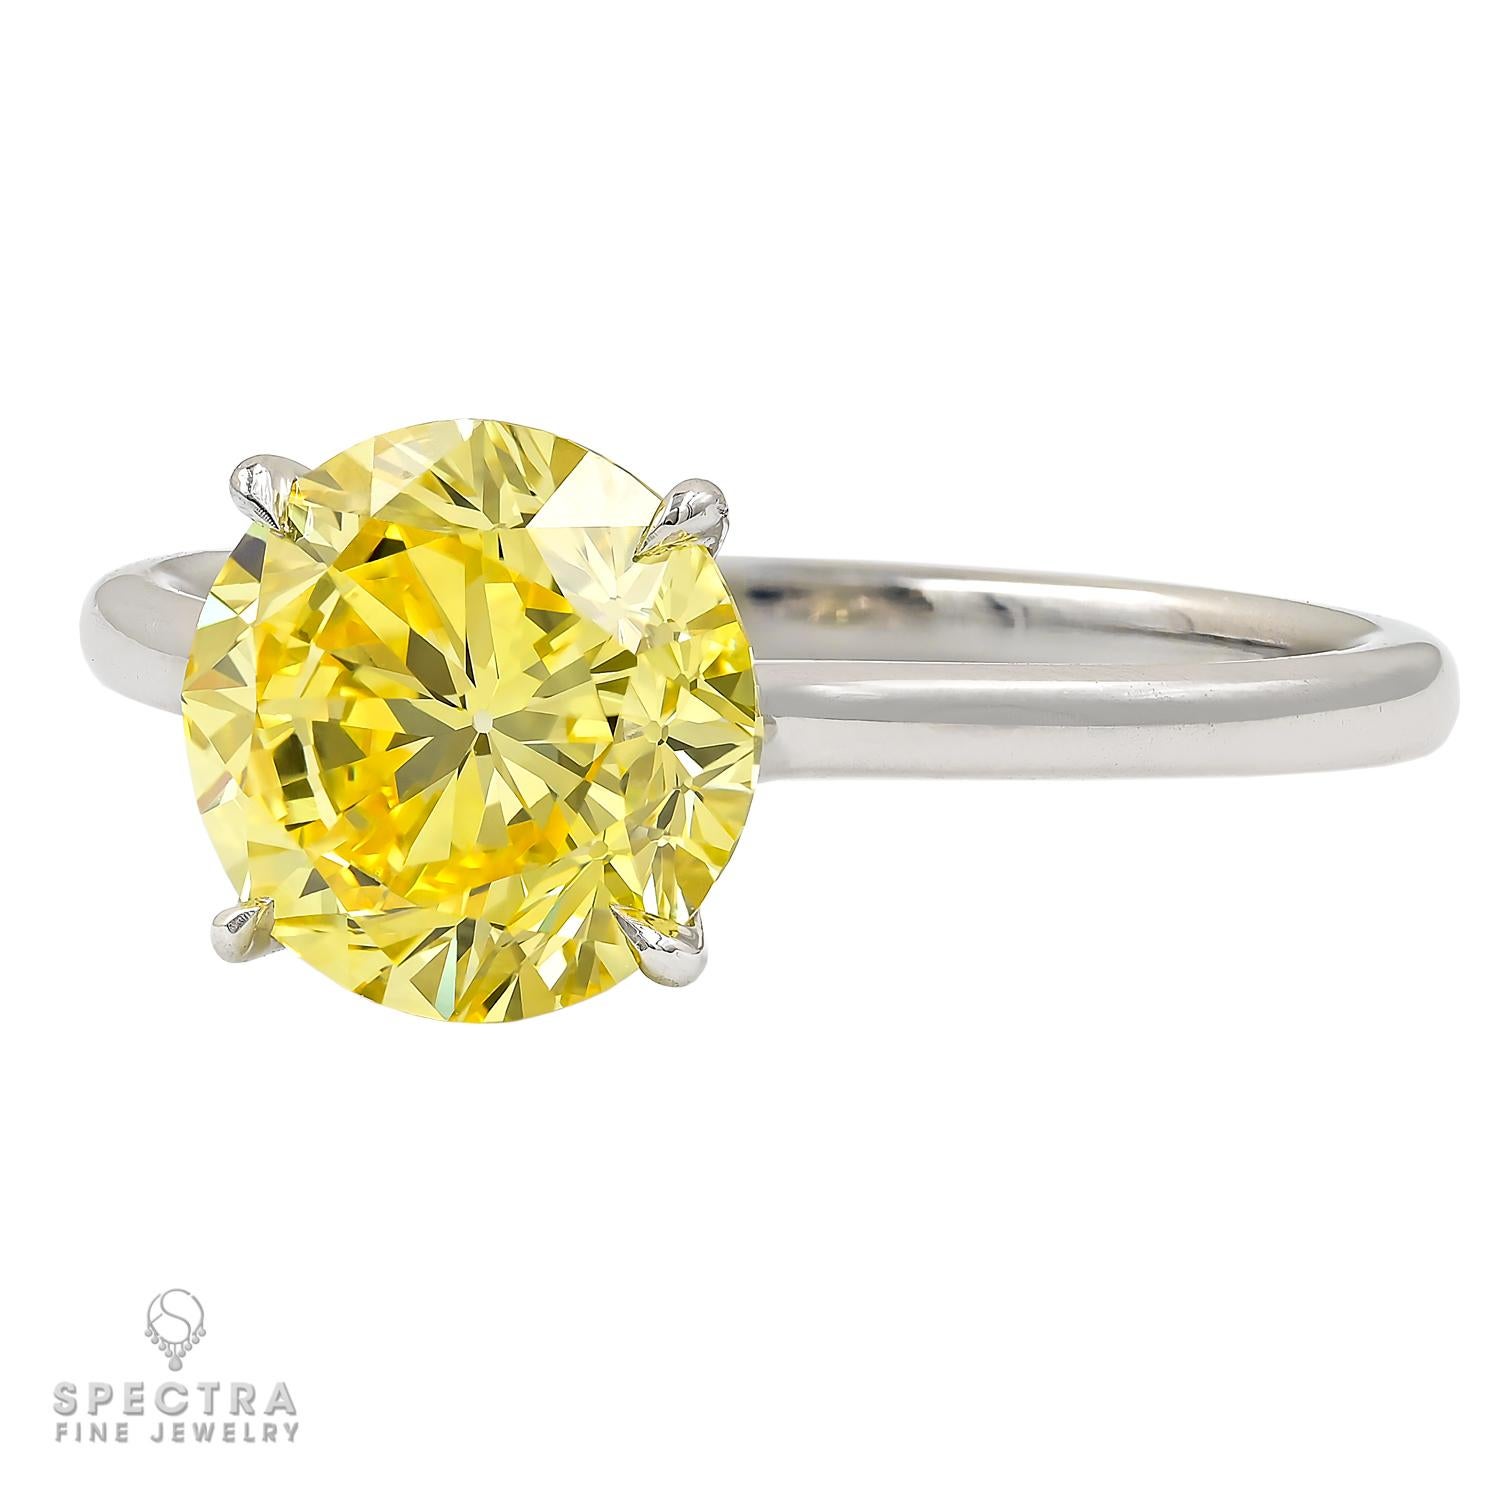 This remarkable piece boasts a 2.37 carat Round Yellow Diamond, an absolute marvel in the world of fine jewelry. Certified by the Gemological Institute of America (GIA) as Fancy Vivid Yellow and Internally Flawless, the diamond is a true rarity,